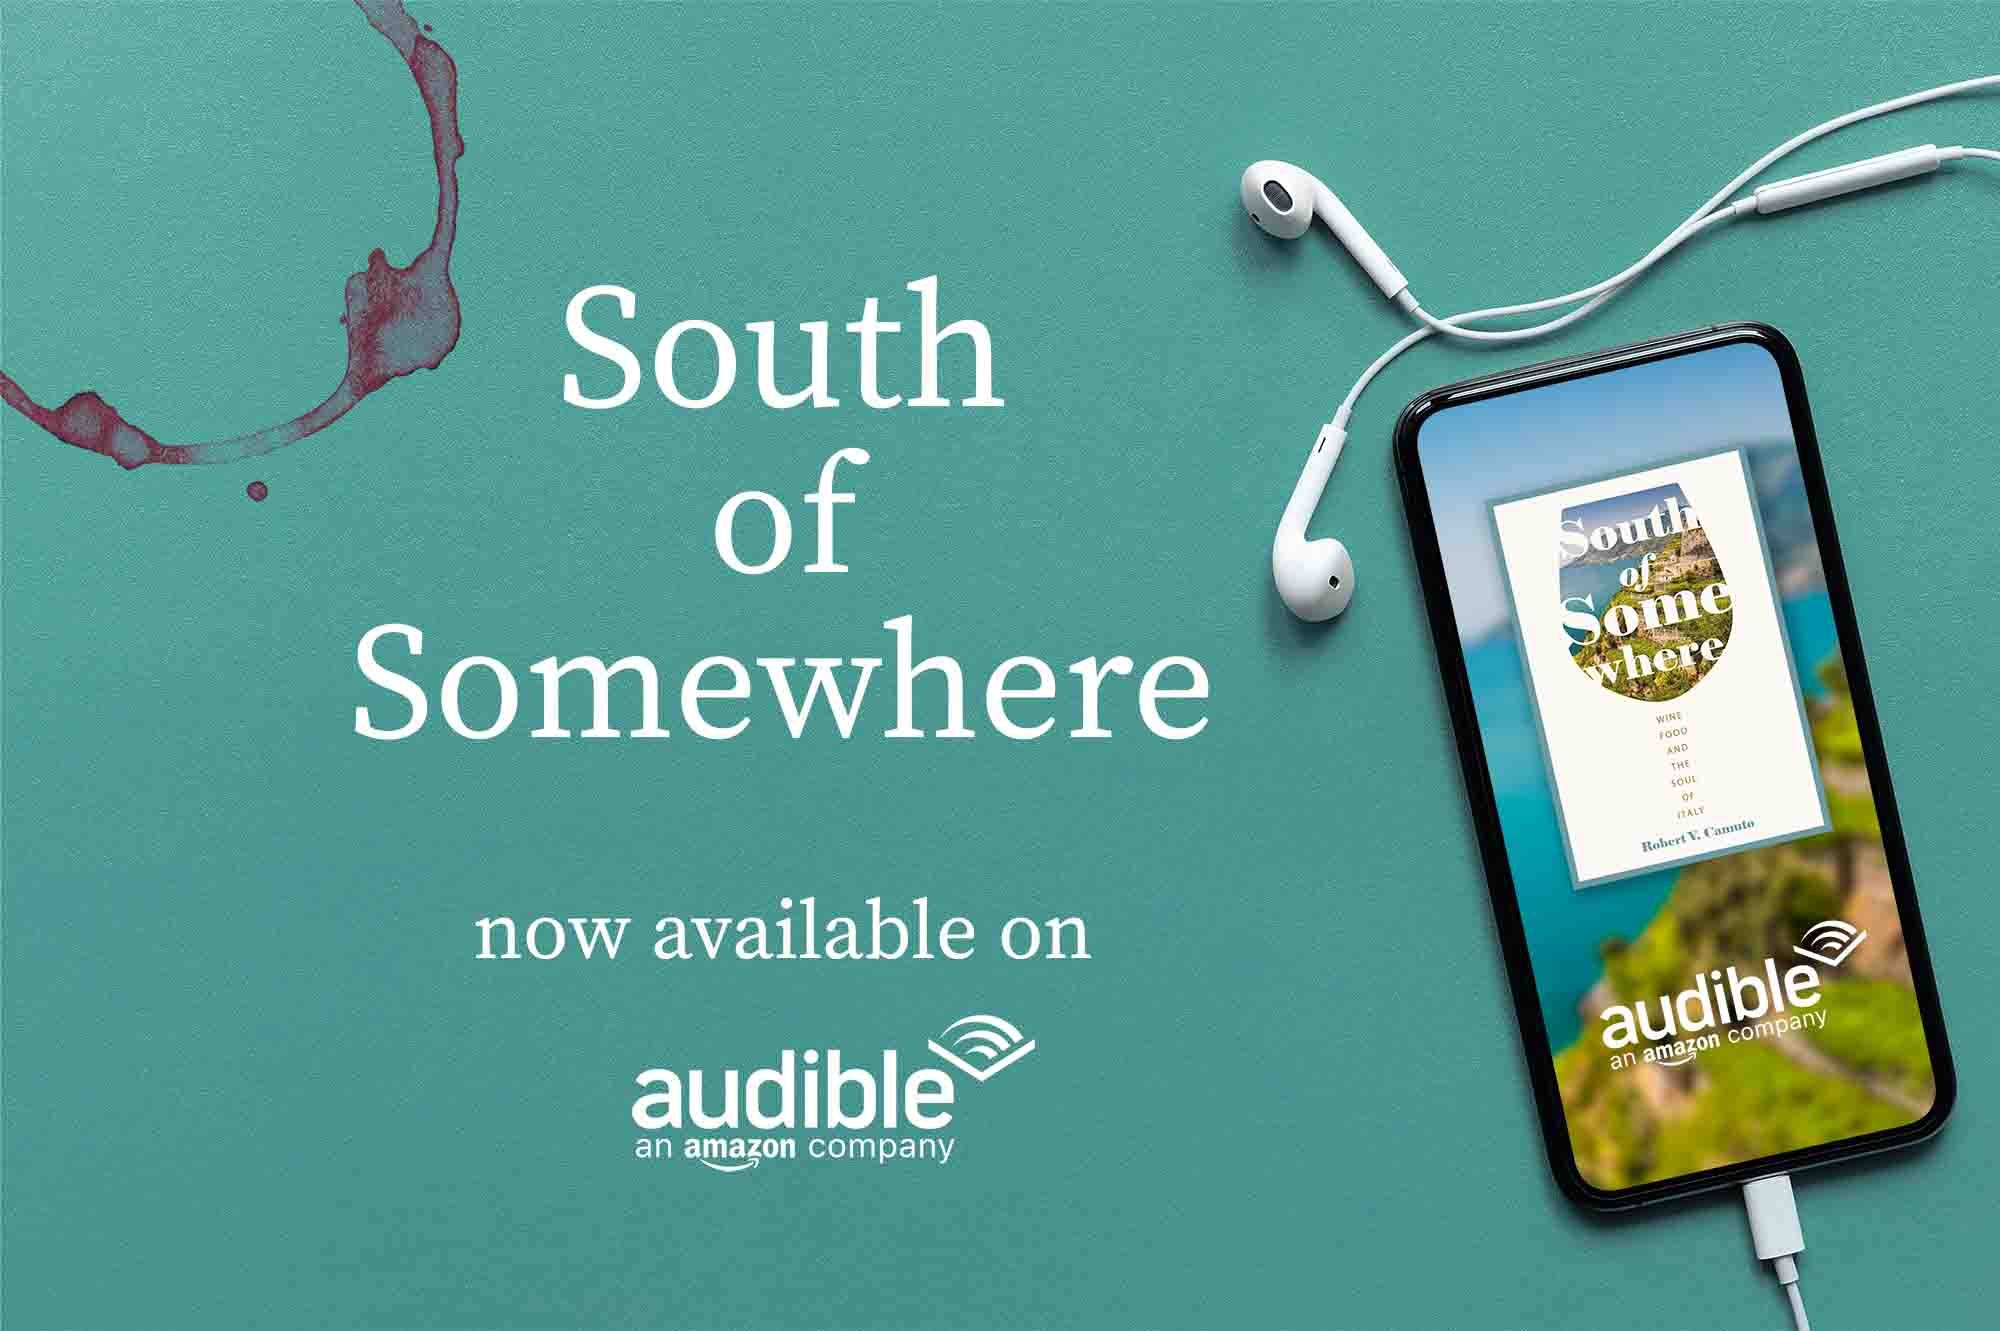 South of Somewhere is on audible